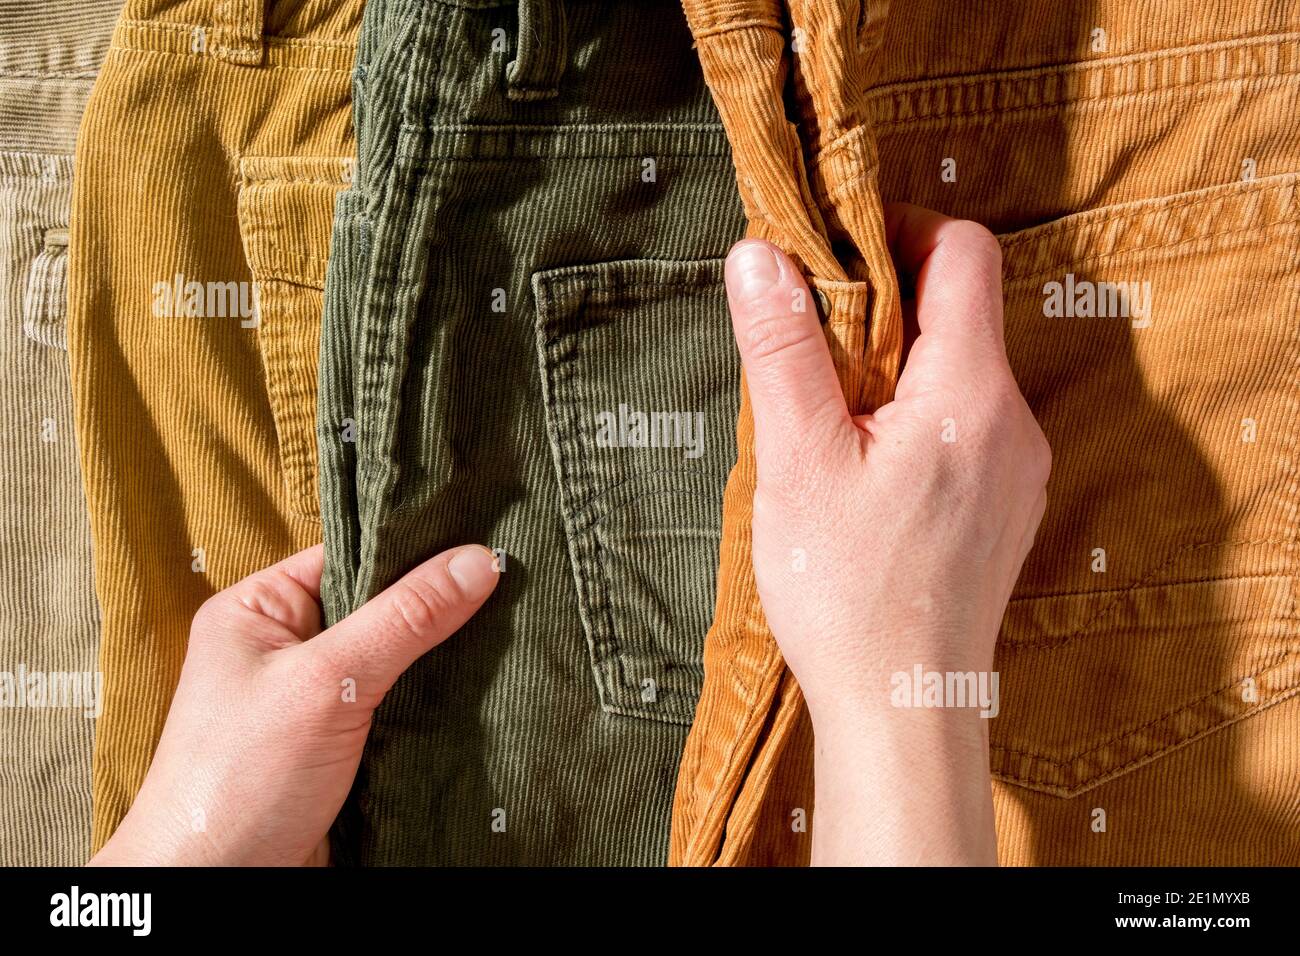 Hands touch the corduroy trousers lying on the counter. Shopping.  Stock Photo